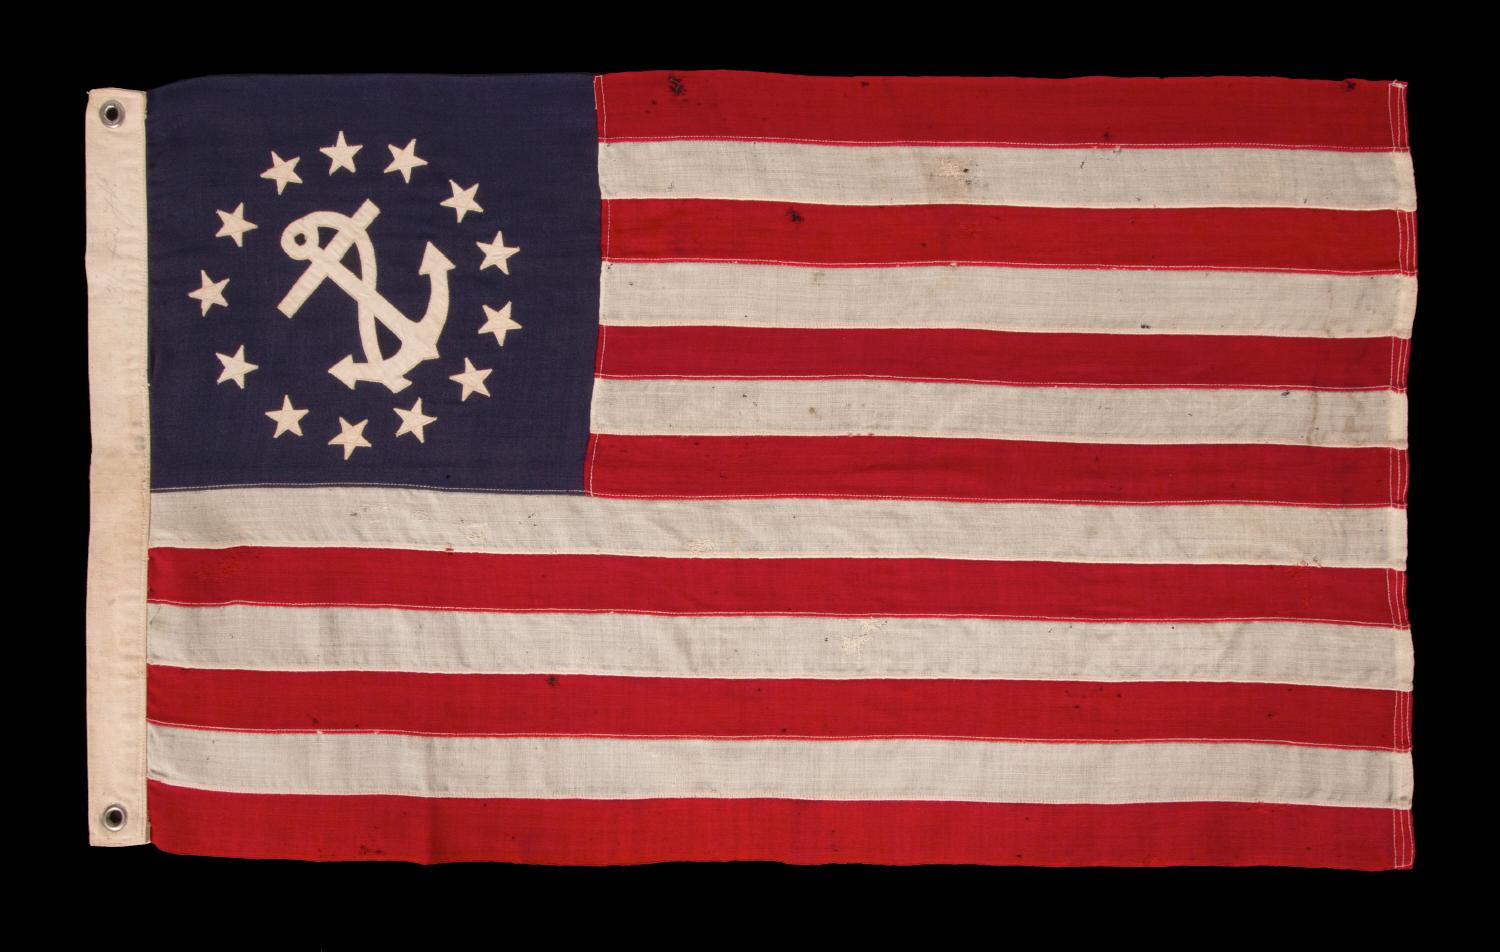 Antique American Private Yacht Flag (Ensign) With 13 Stars Surrounding A Canted Anchor, An Attractive, Elongated Example With An Off-set Device, circa 1905–1920.

The medallion configuration, 13-star, 13-stripe flag with a canted center anchor was